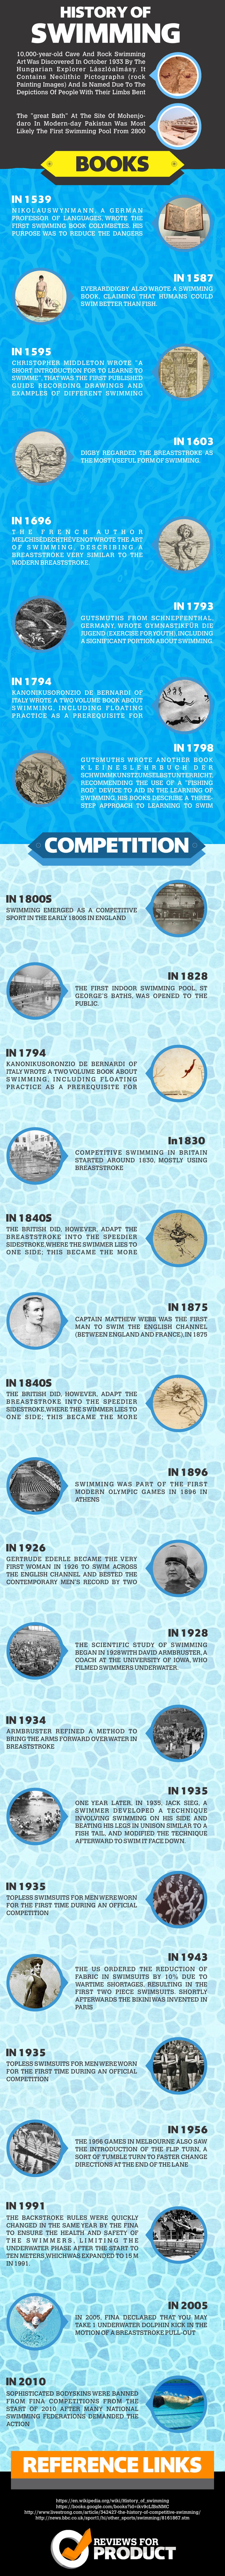 History-of-Swimming-Infographic